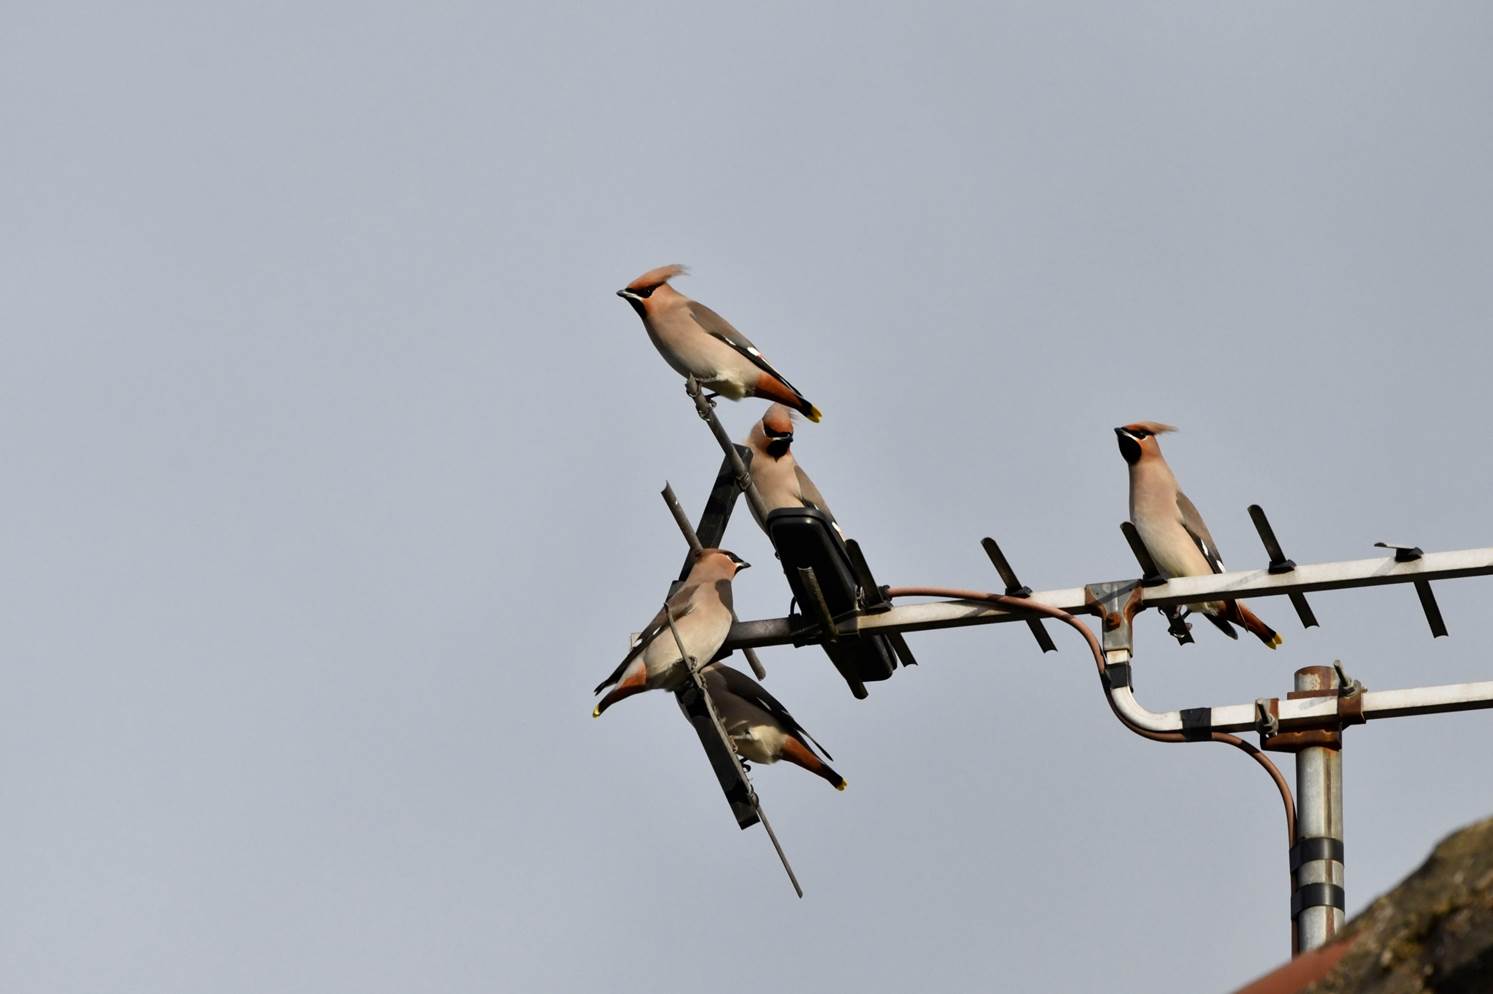 A group of birds on a antenna

Description automatically generated